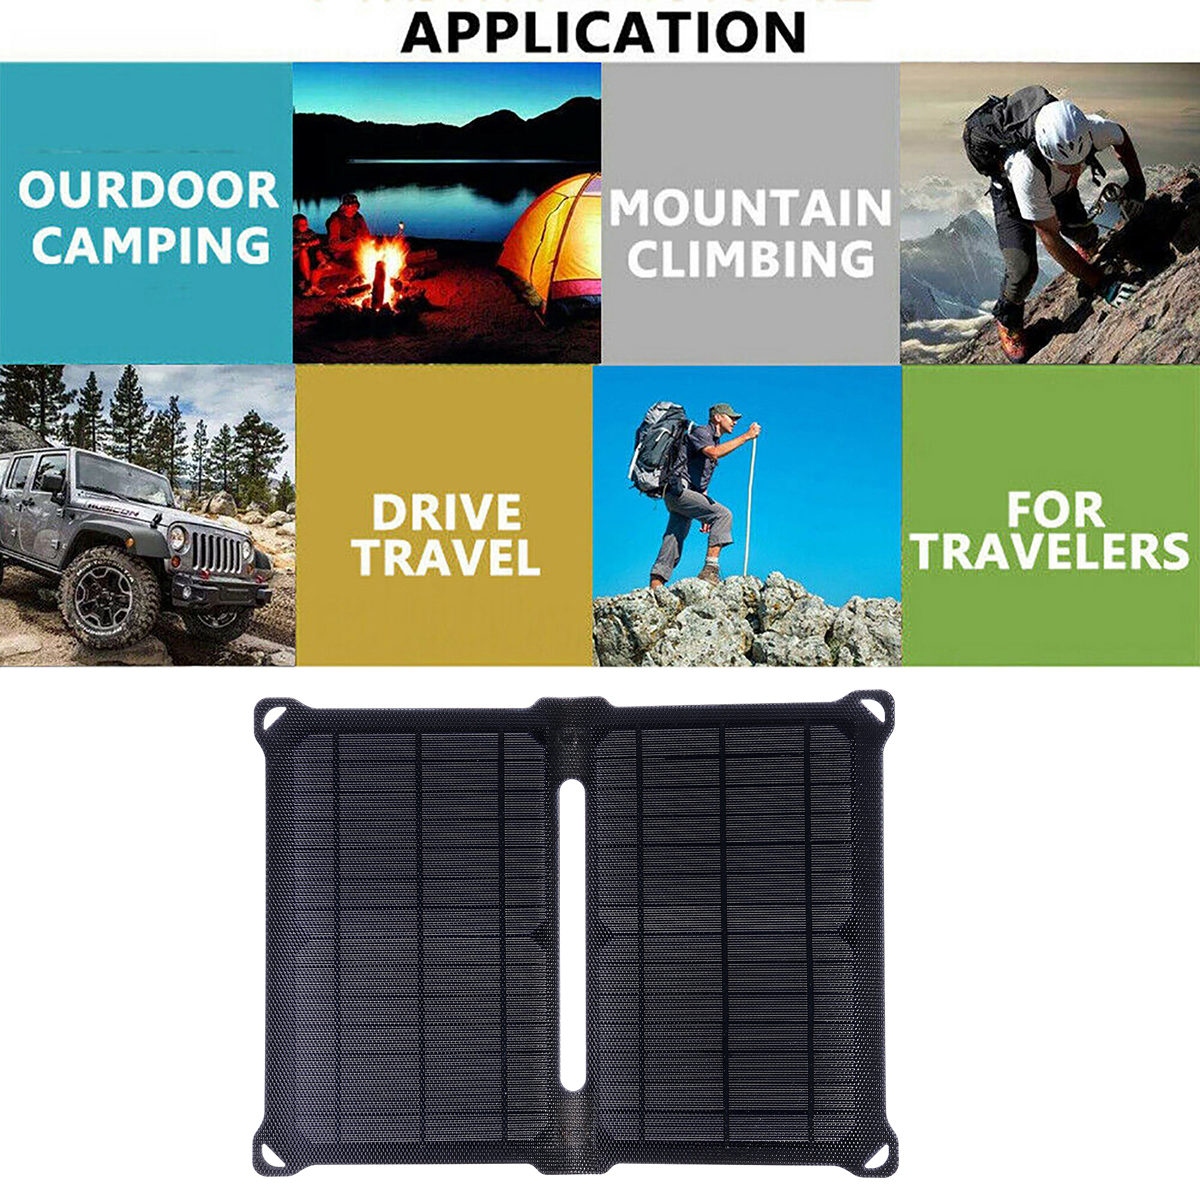 Foldable-Solar-Charger-Waterproof-ETFE-Monoctrystalline-Solar-Panel-Dual-USB-Ports-Outdoor-Camping-C-1935777-9